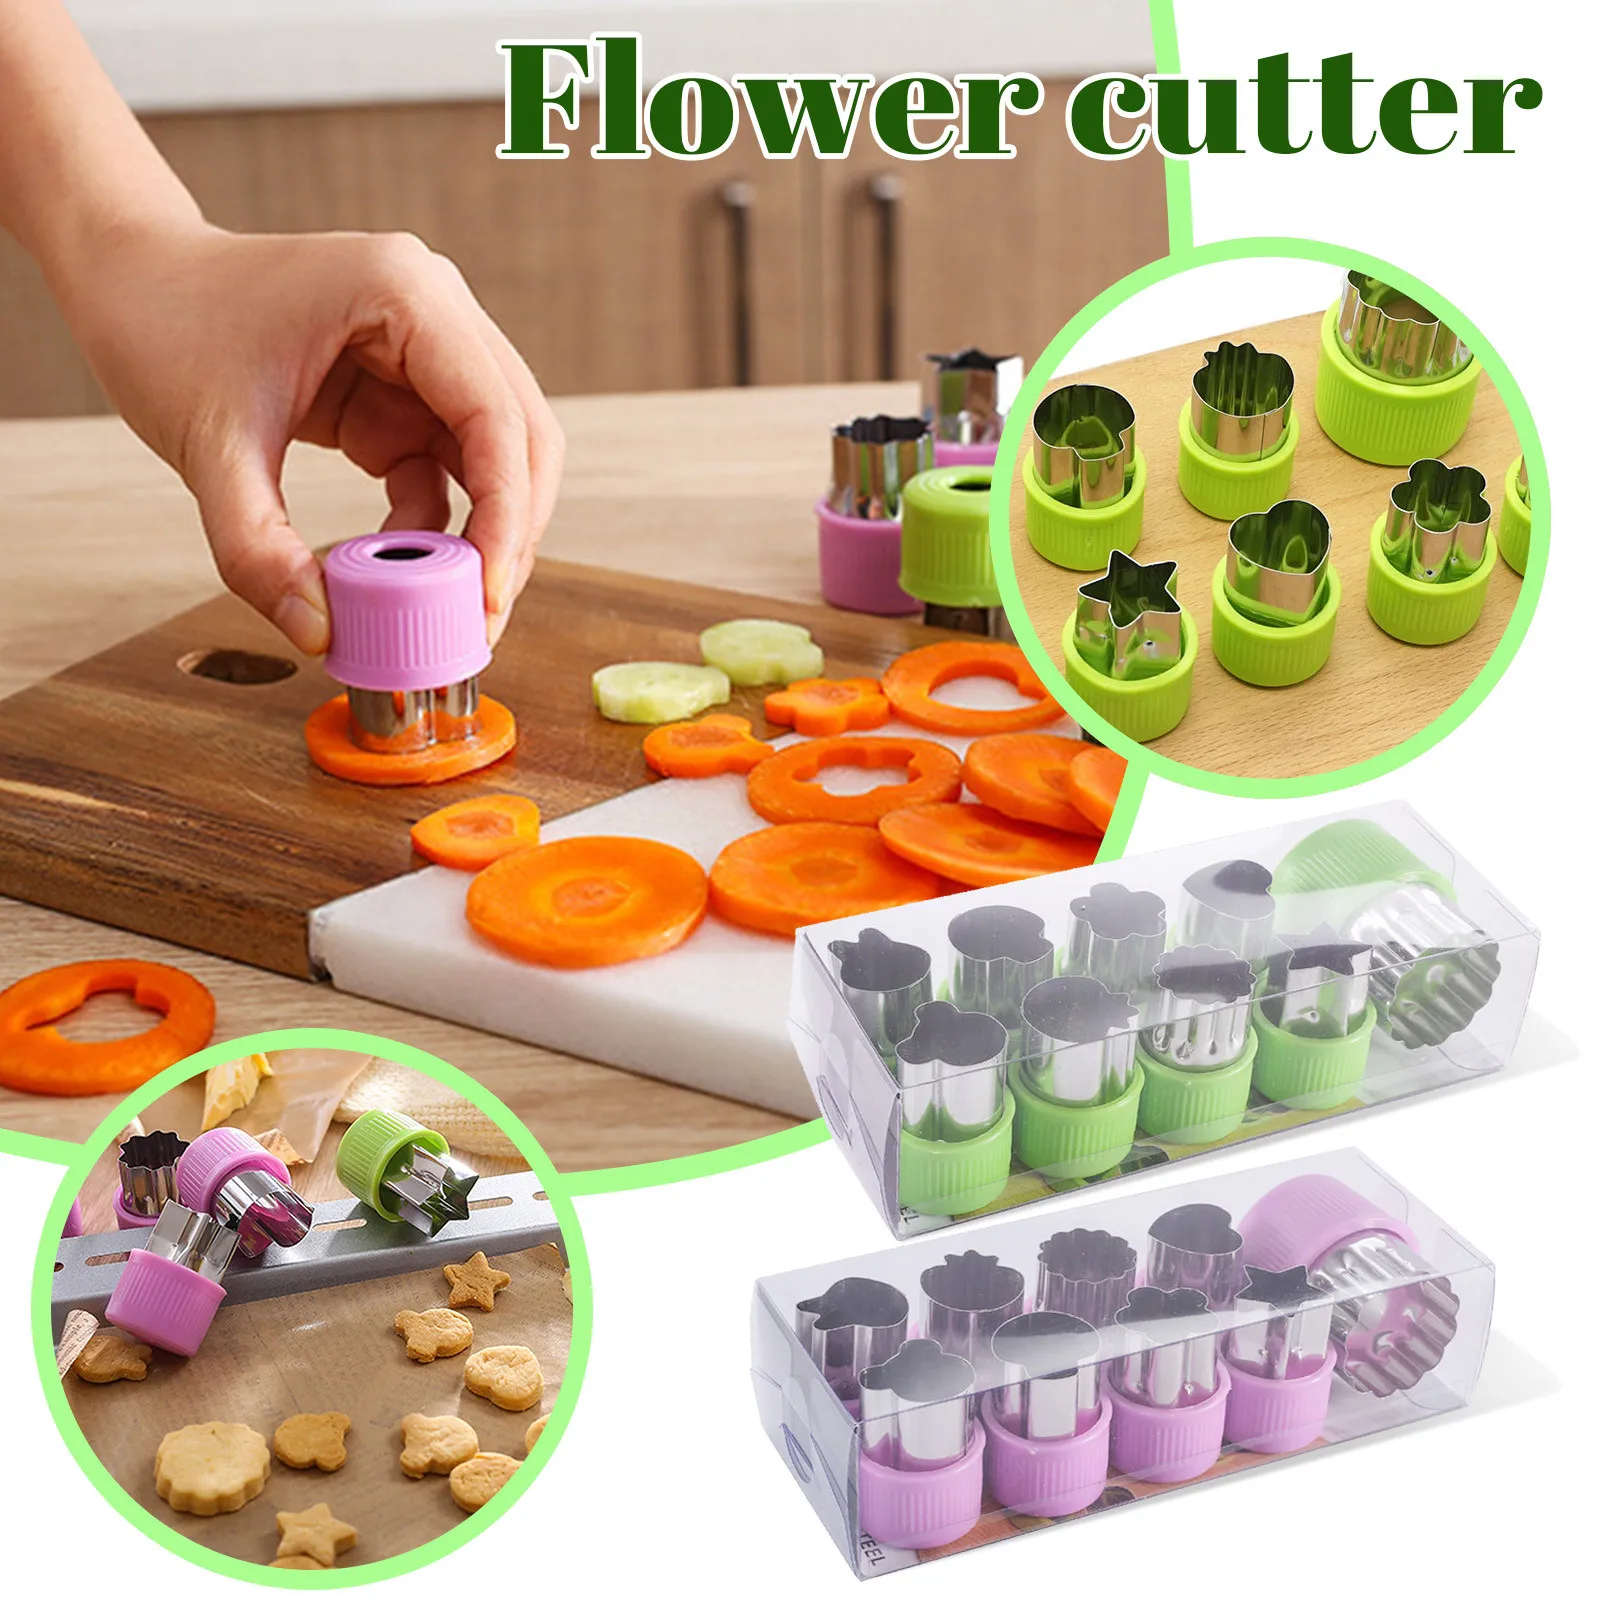 https://ae01.alicdn.com/kf/Sb9f485ca48244af980bcdcc1bbd66e26K/12-Pcs-Vegetable-Cutter-Shapes-Set-Mini-Pie-Cookie-Cutters-Fruit-Pastry-Stamps-Mold-For-Kids.jpg